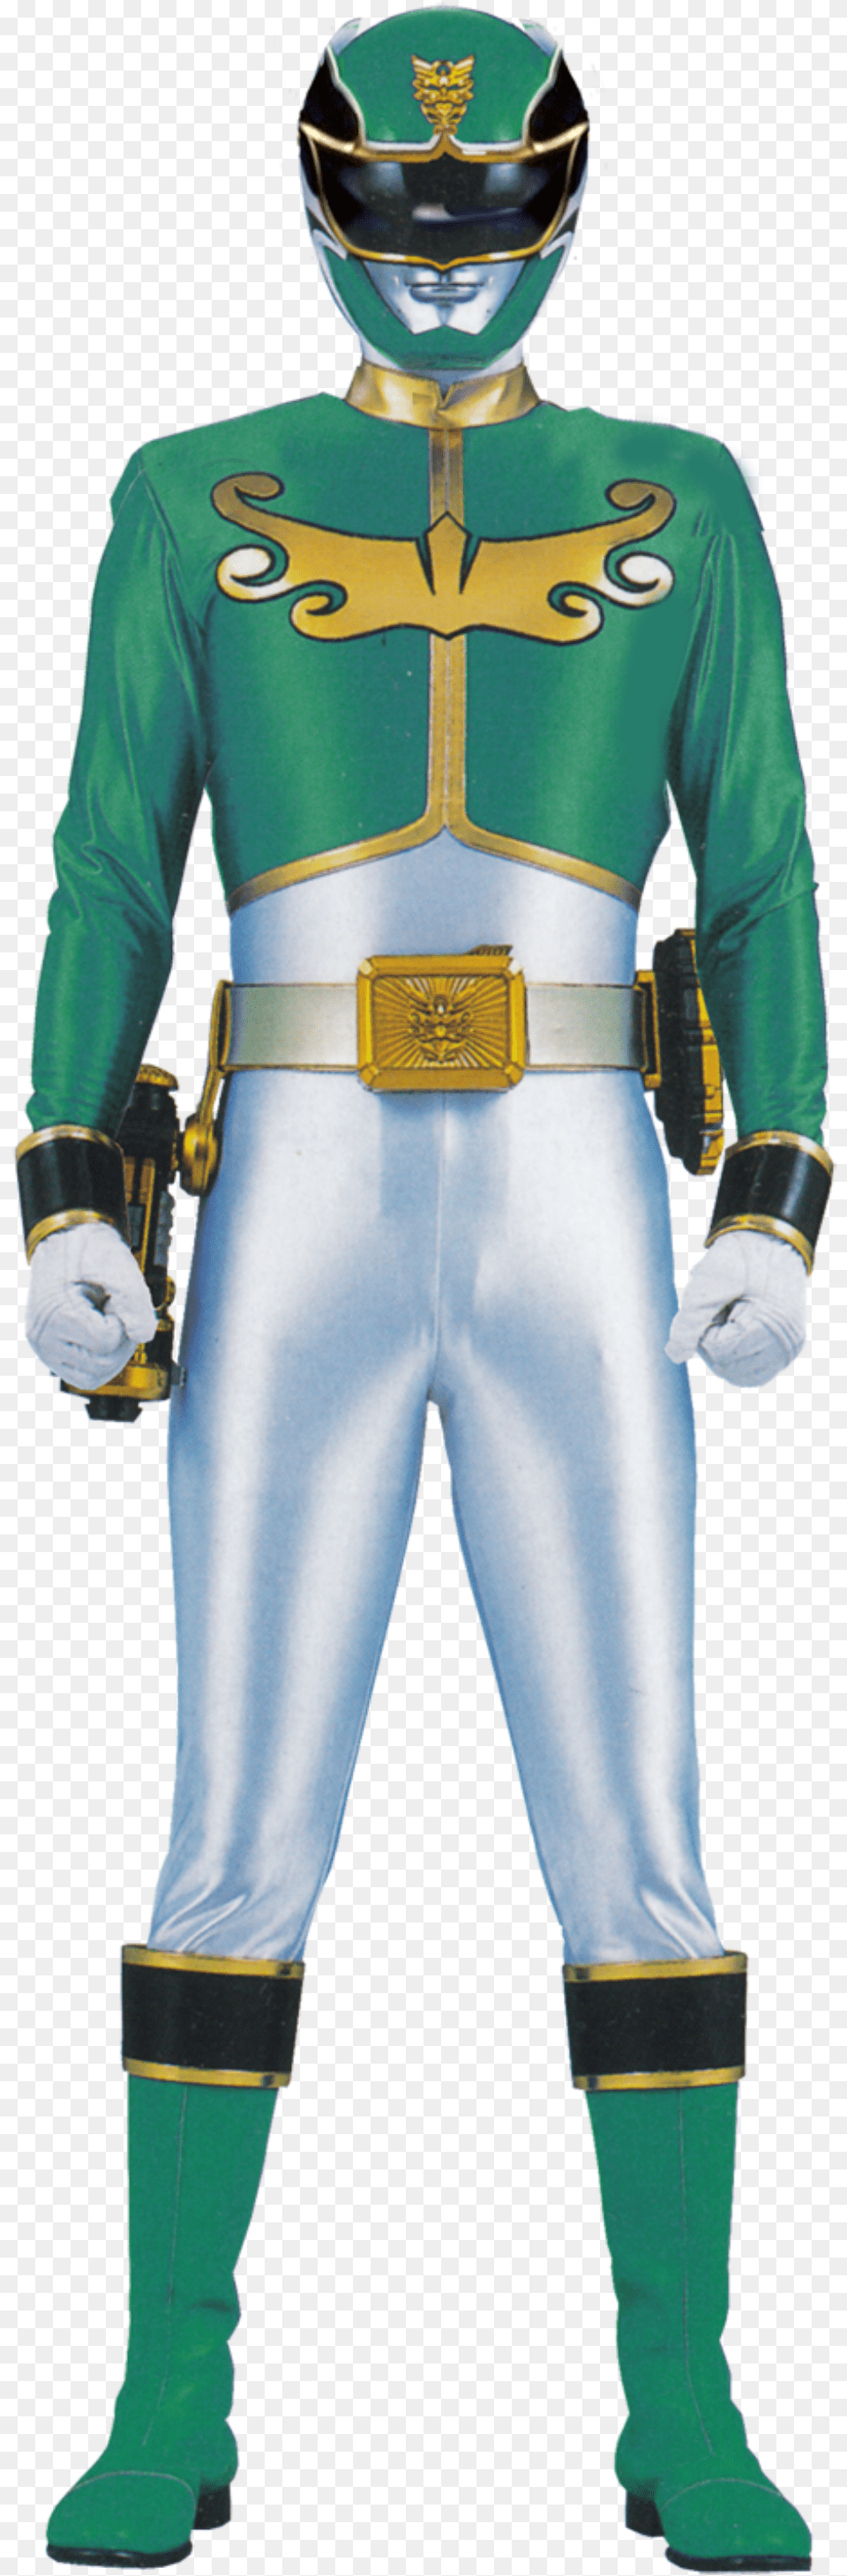 Rangerwiki Power Rangers Megaforce Green, Clothing, Costume, Person, Adult Png